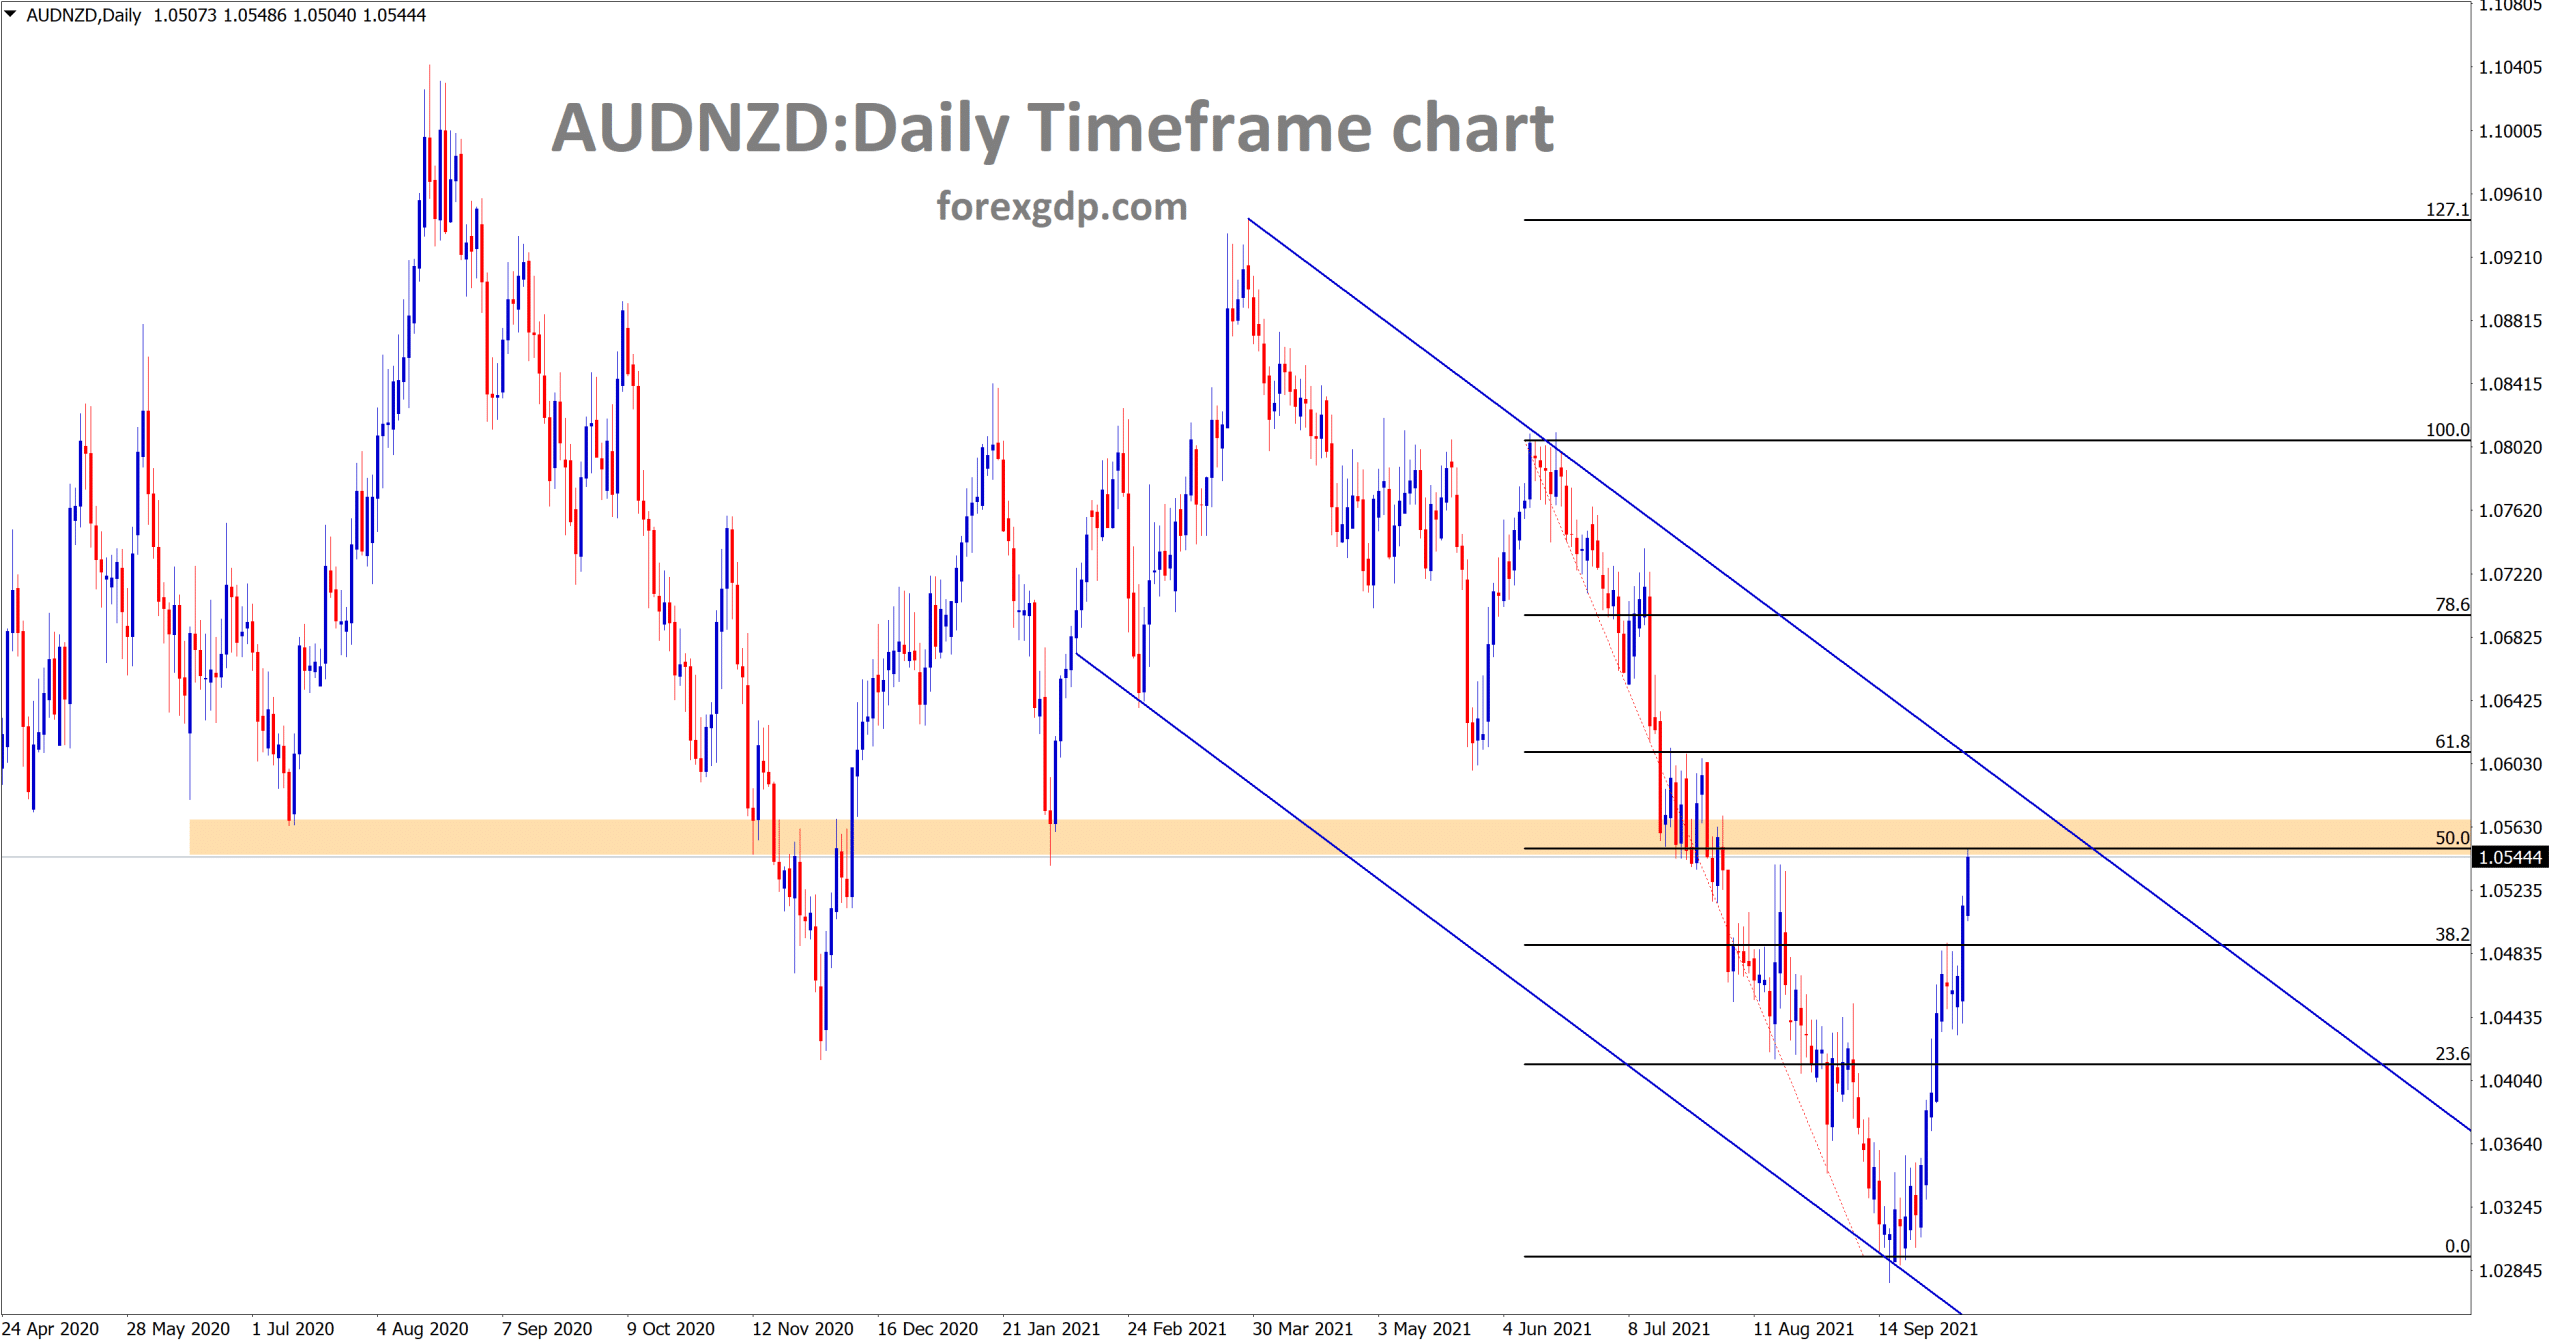 AUDNZD is going to reach the lower high area of the downtrend line